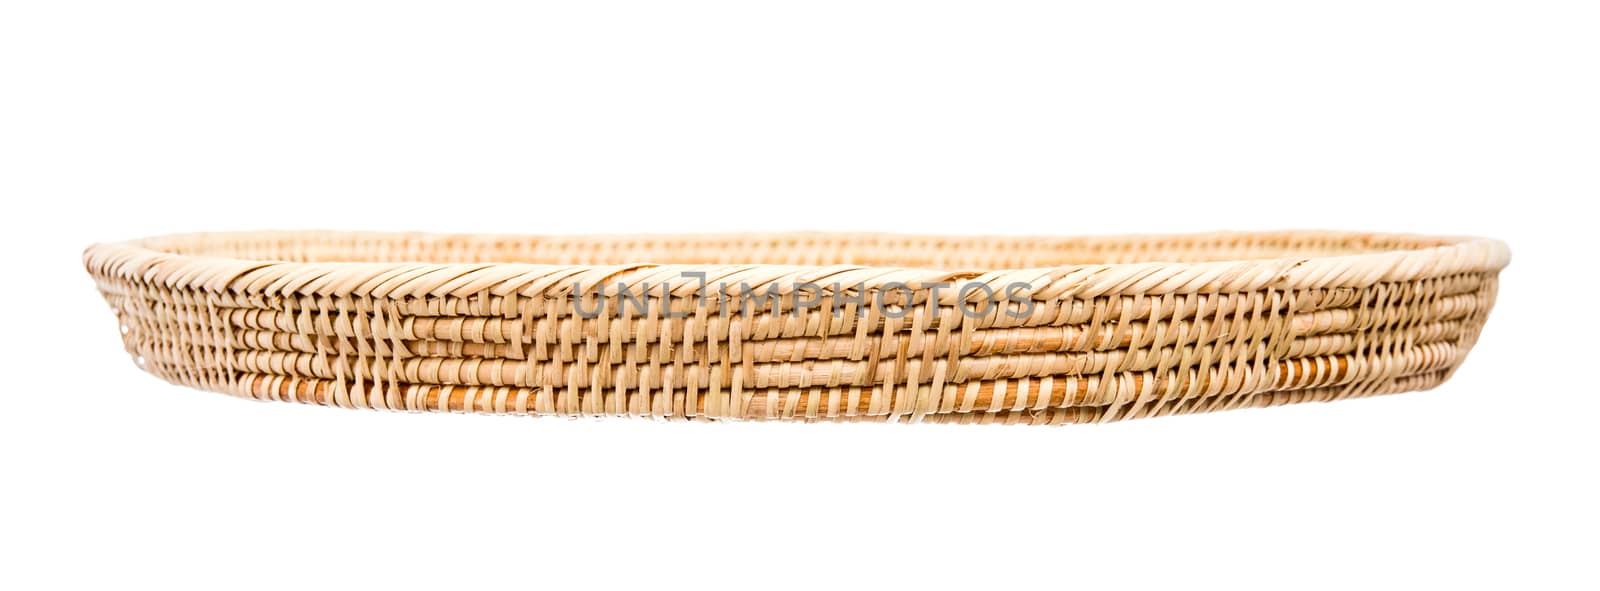 Wood basket wicker wooden in handmade front view isolate on over white background